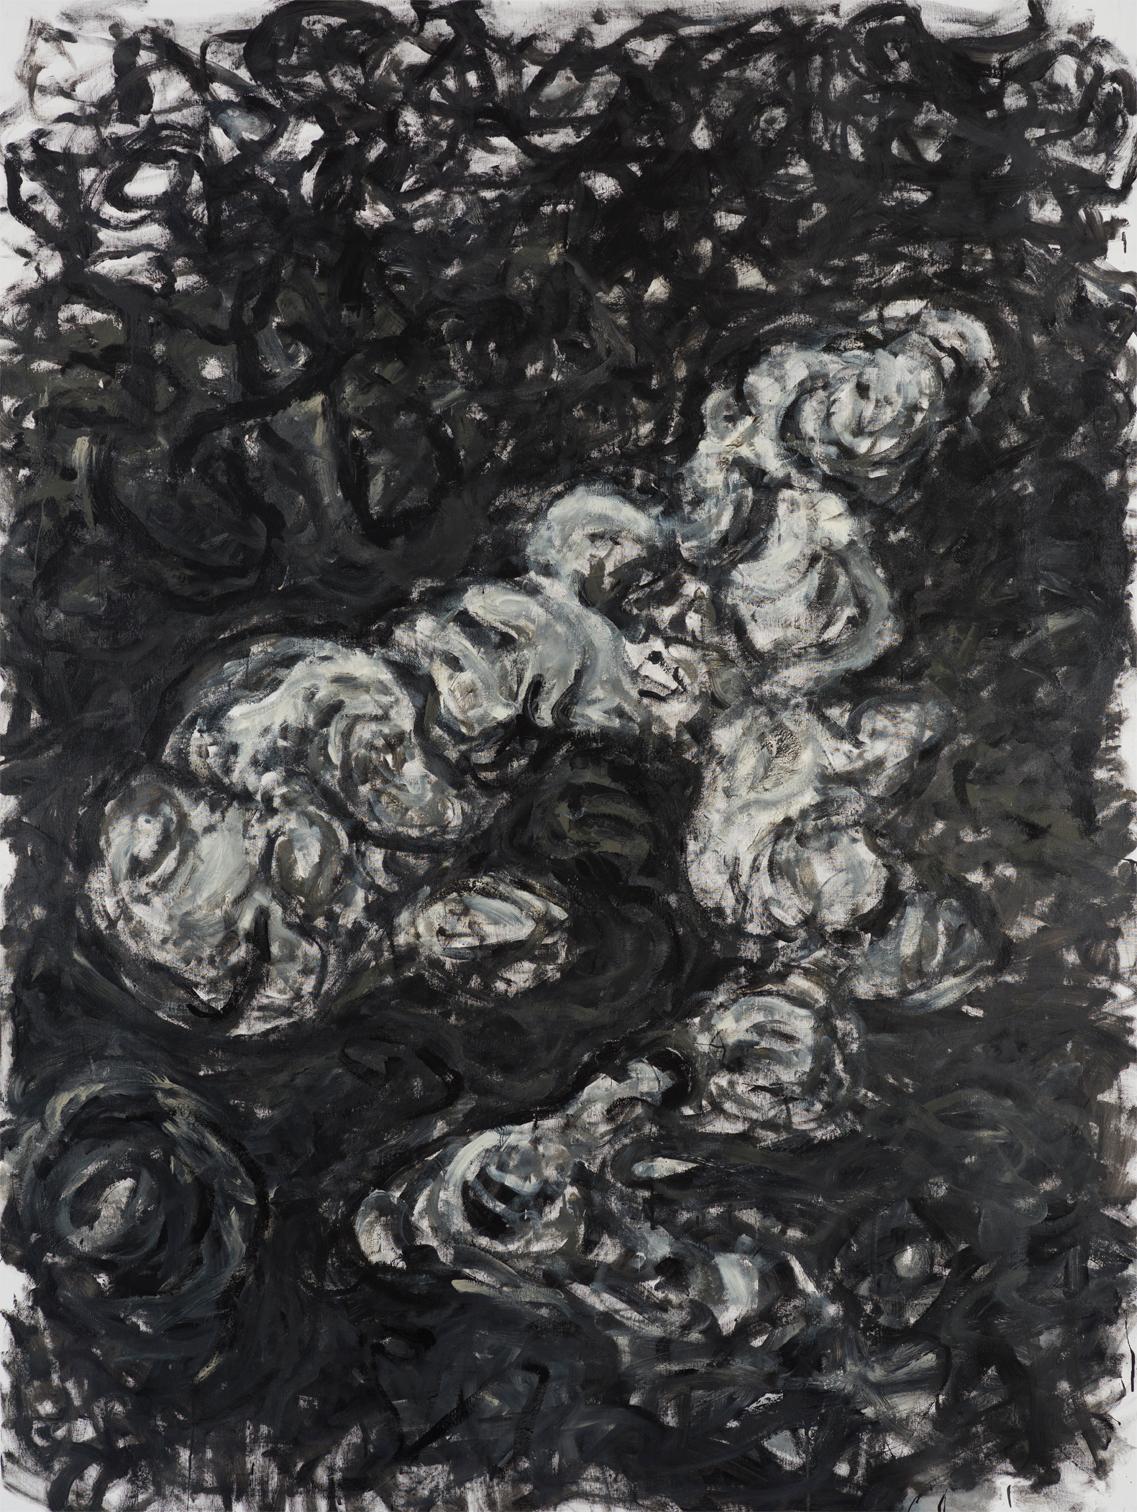 Untitled 02 [Remains of the Remains 02] - Black, Contemporary, Abstract, Gray - Painting by Zsolt Berszán